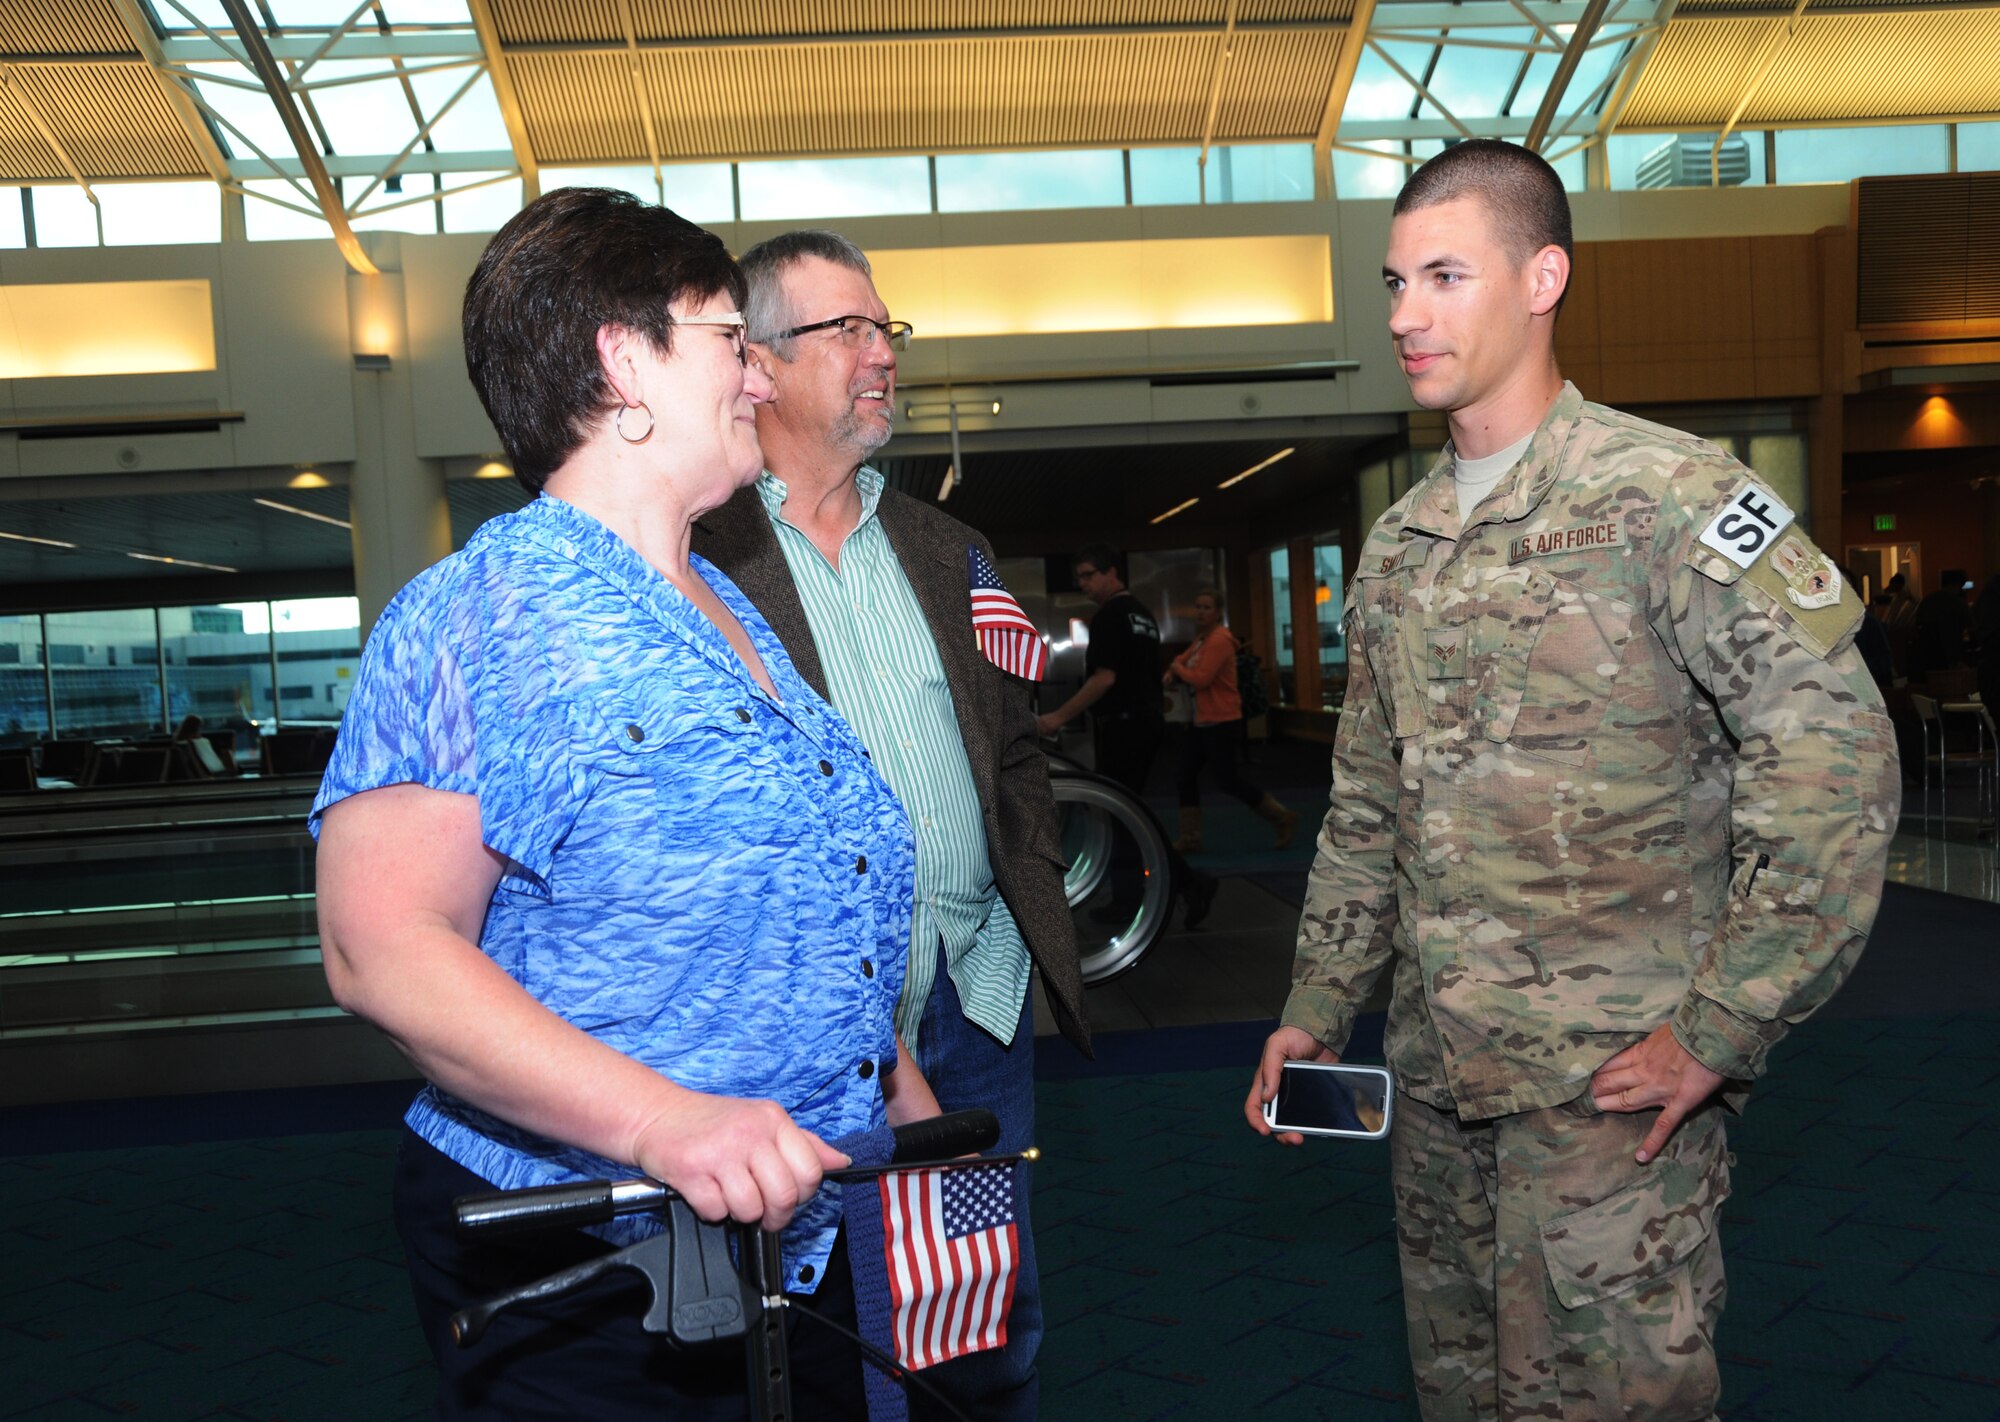 Family members greet Senior Airman David Smith as he and five other Airmen returned from their OEF deployment to Portland, Ore., Oct. 31, 2014.  (U.S. Air National Guard photo by Tech. Sgt. John Hughel, 142nd Fighter Wing Public Affairs/Released)